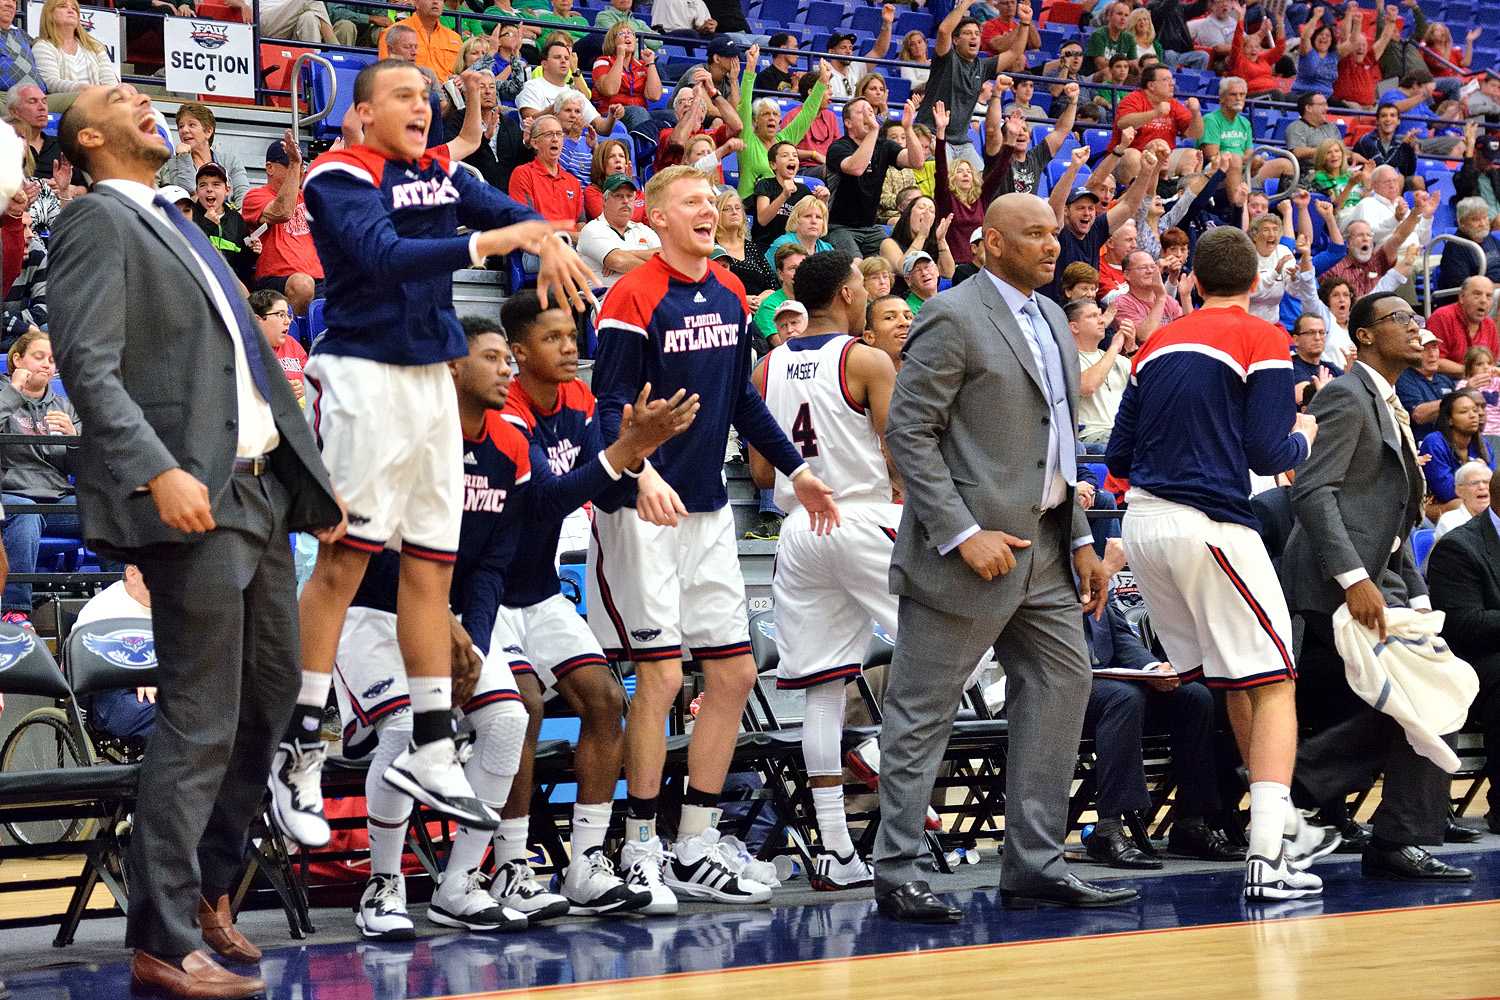 Players and fans celebrate a score in the final minute extending FAU’s lead over Marshall. 